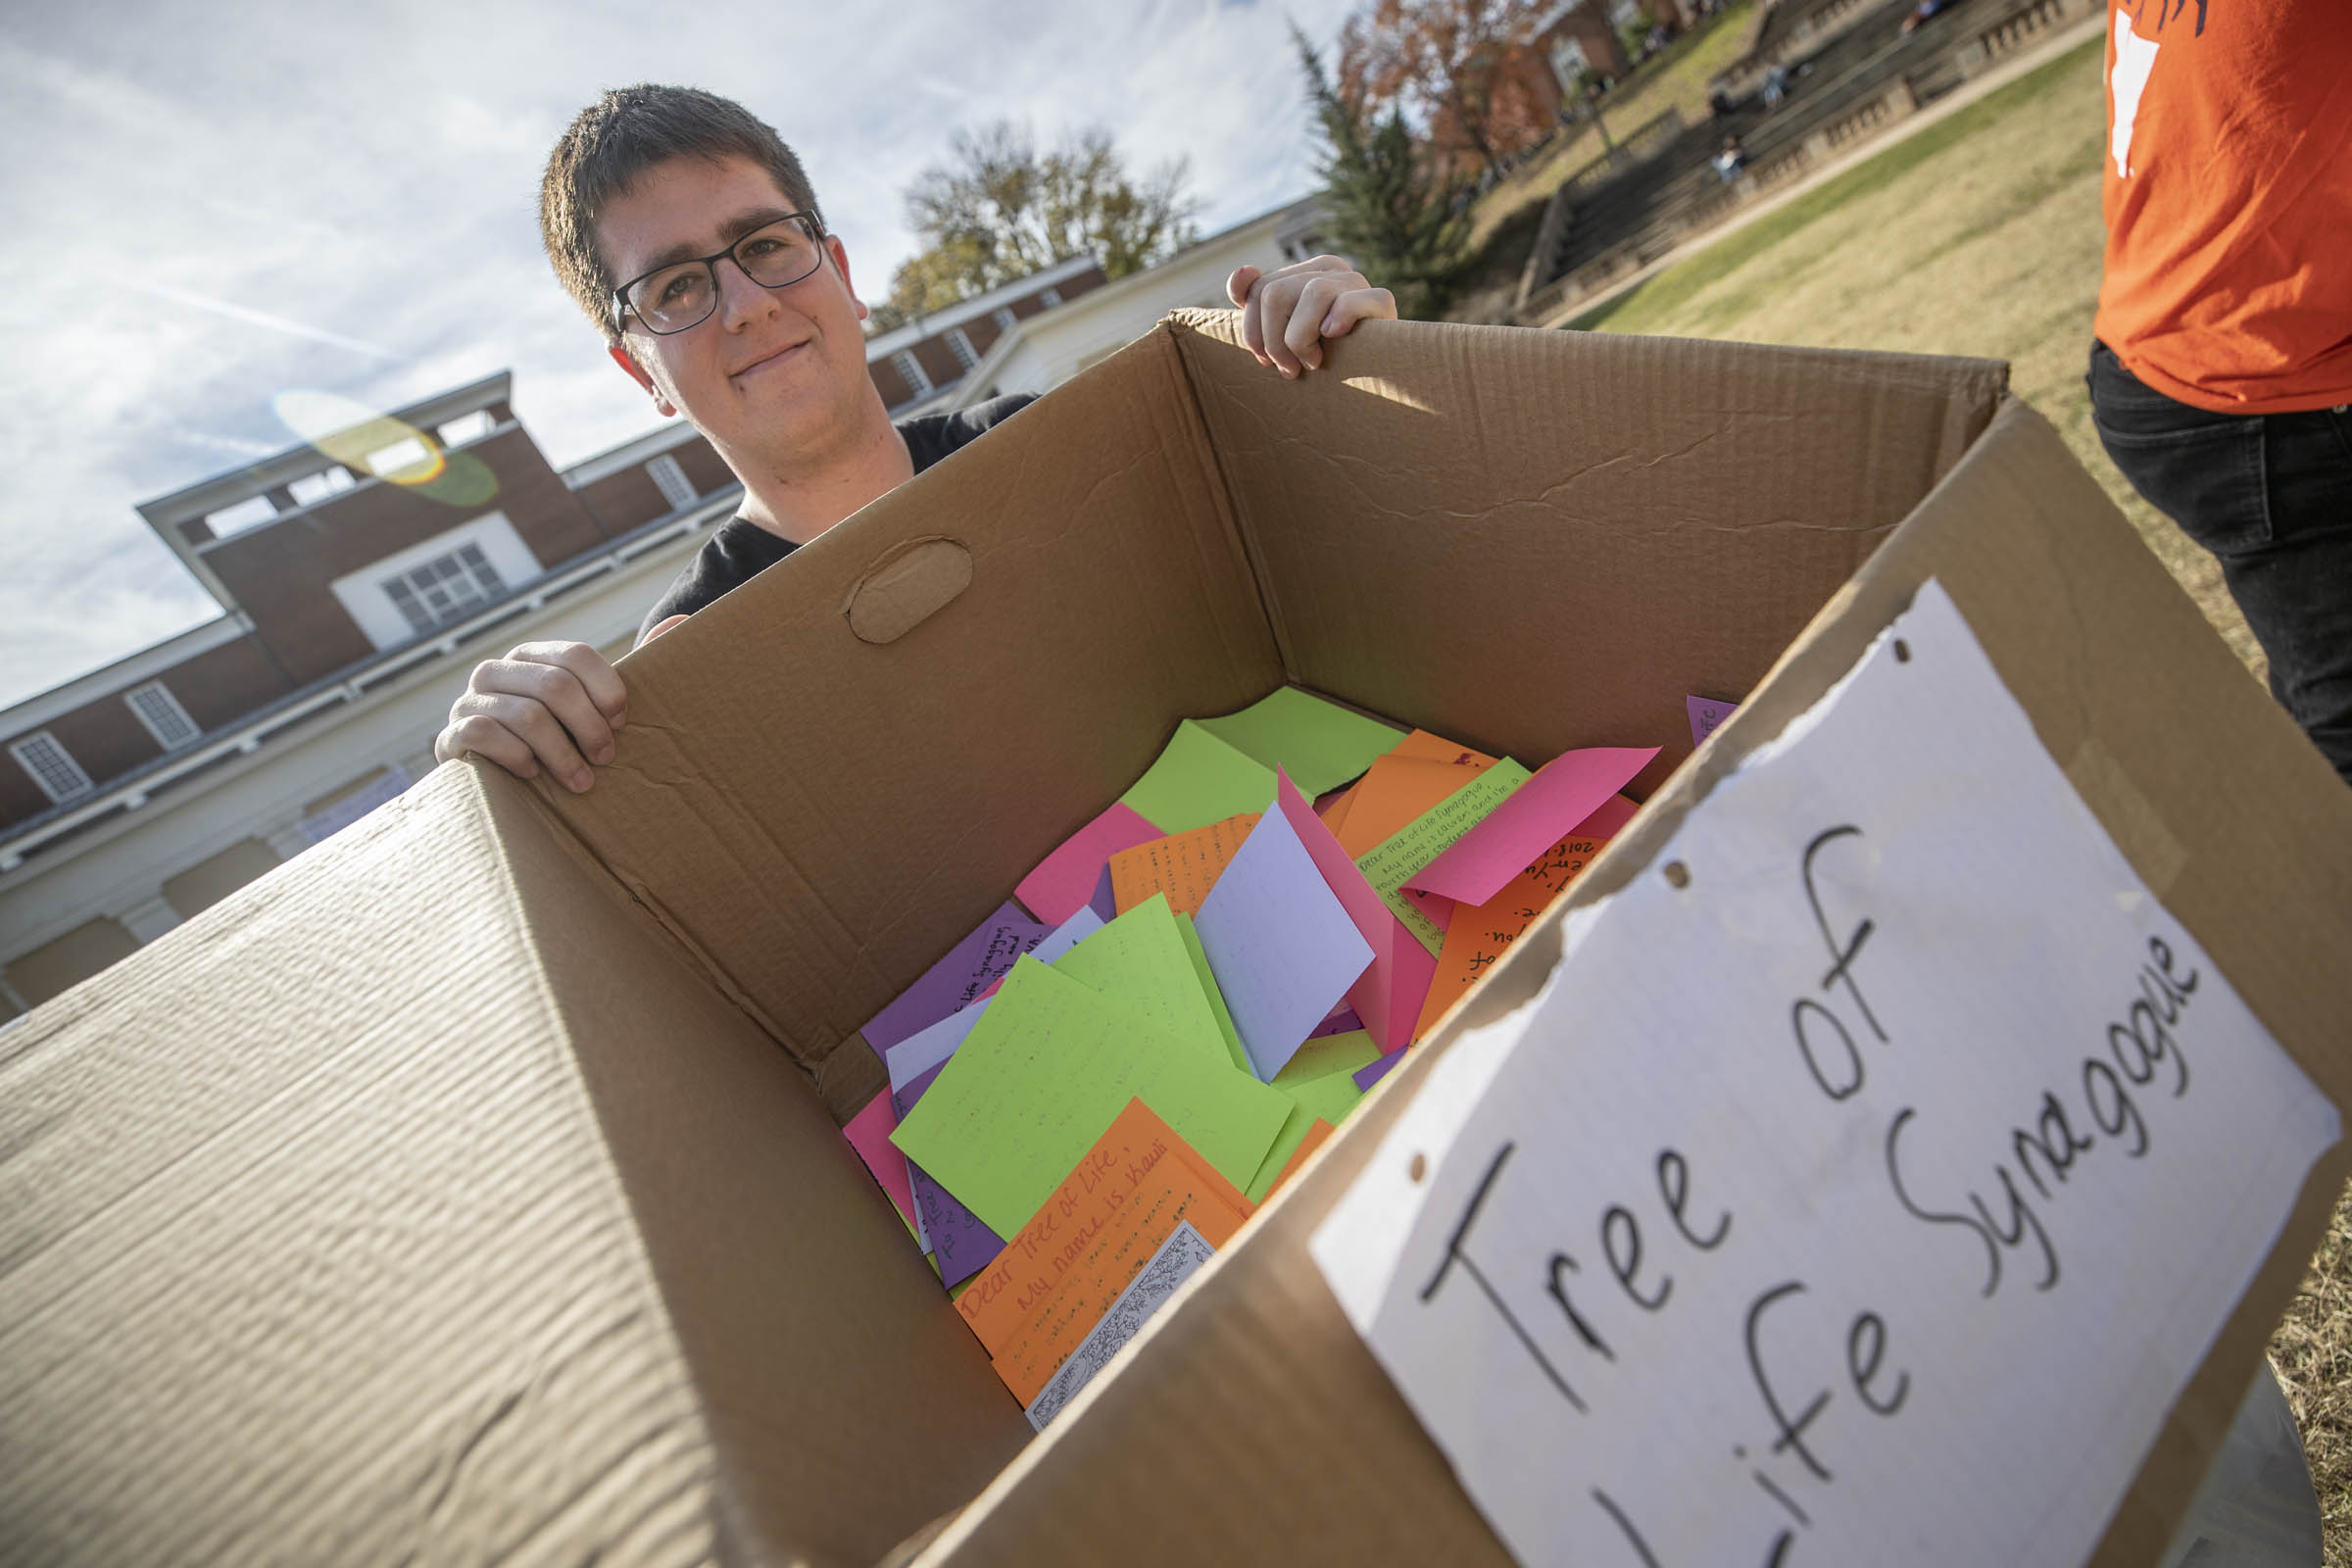 Ben Borenstein, who also helped organize the event, holds a box filled with letters bound for the Tree of Life synagogue.